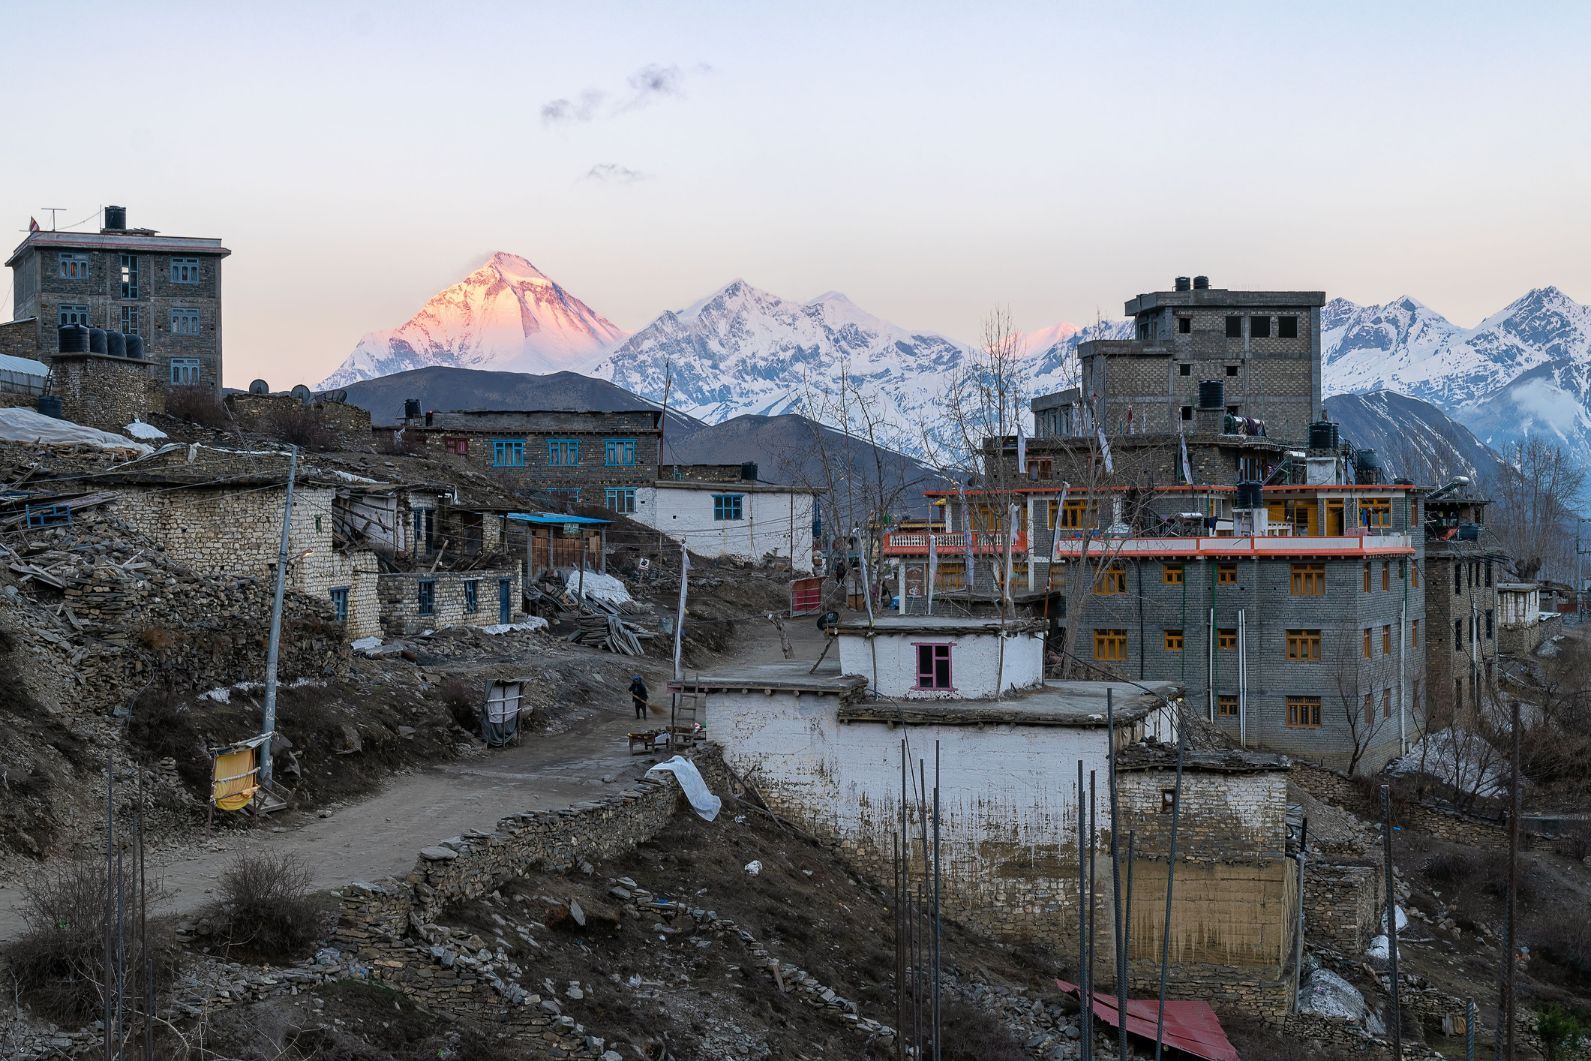 The buildings of Muktinath village and snowy peaks against dawn sky, on the Annapurna circuit, Nepal. Photo: Getty